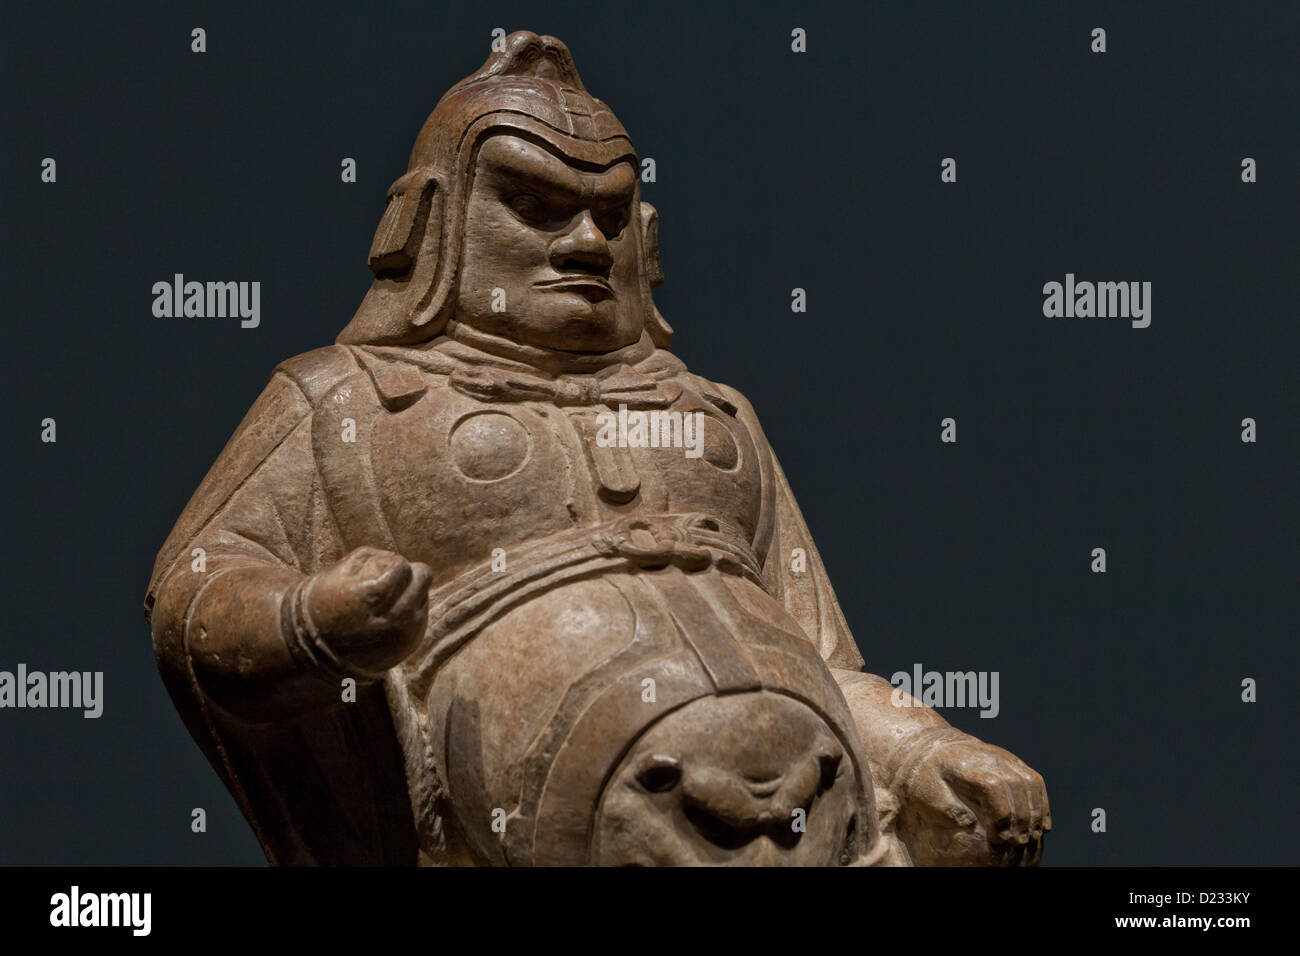 Buddhist temple guardian sculpture, Tang dynasty, 7th century, China Stock Photo